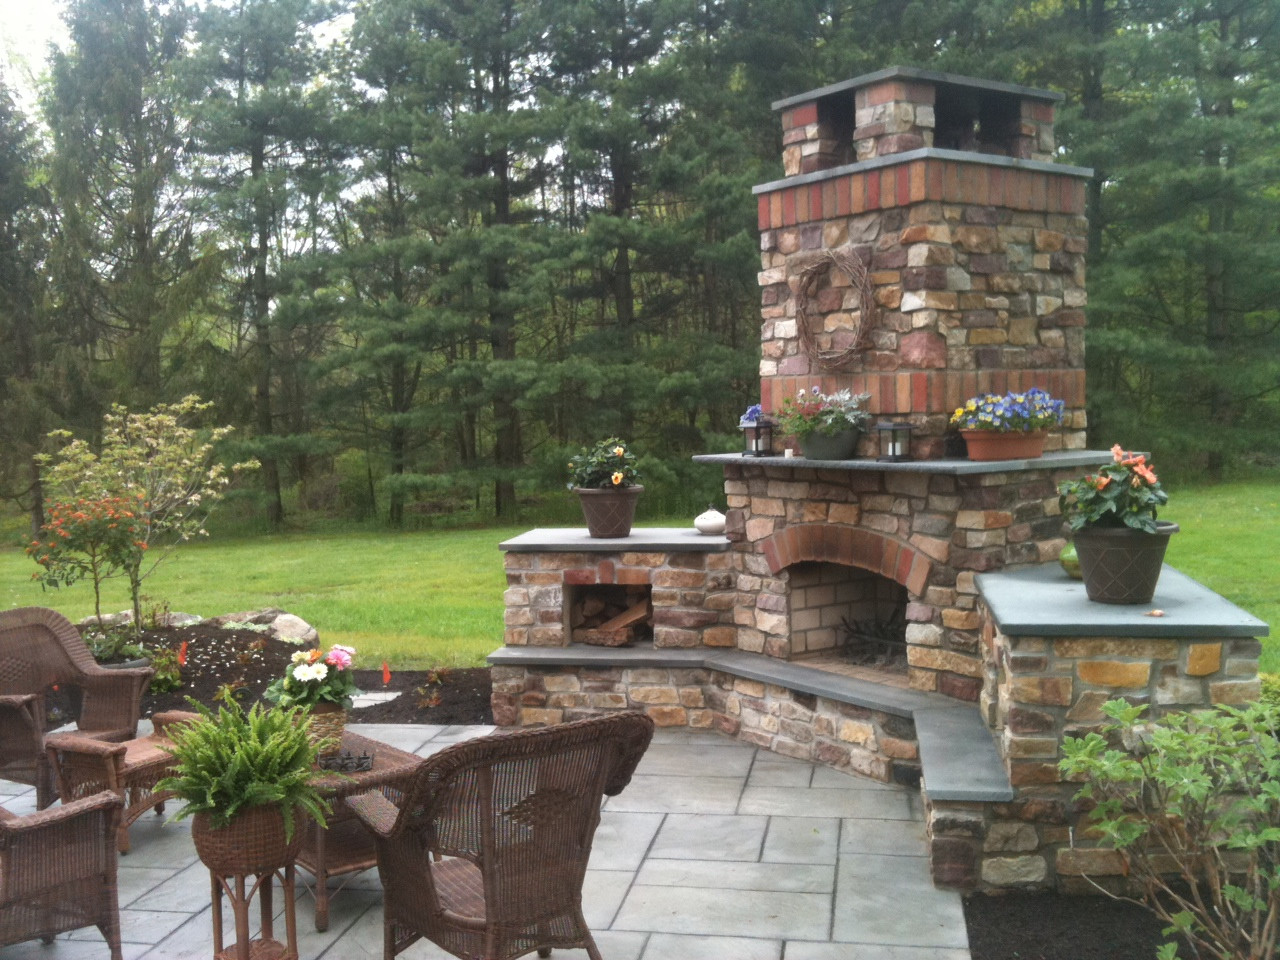 Backyard Fireplace Ideas
 Tag Archive for "Outdoor Fireplace Ideas" Landscaping